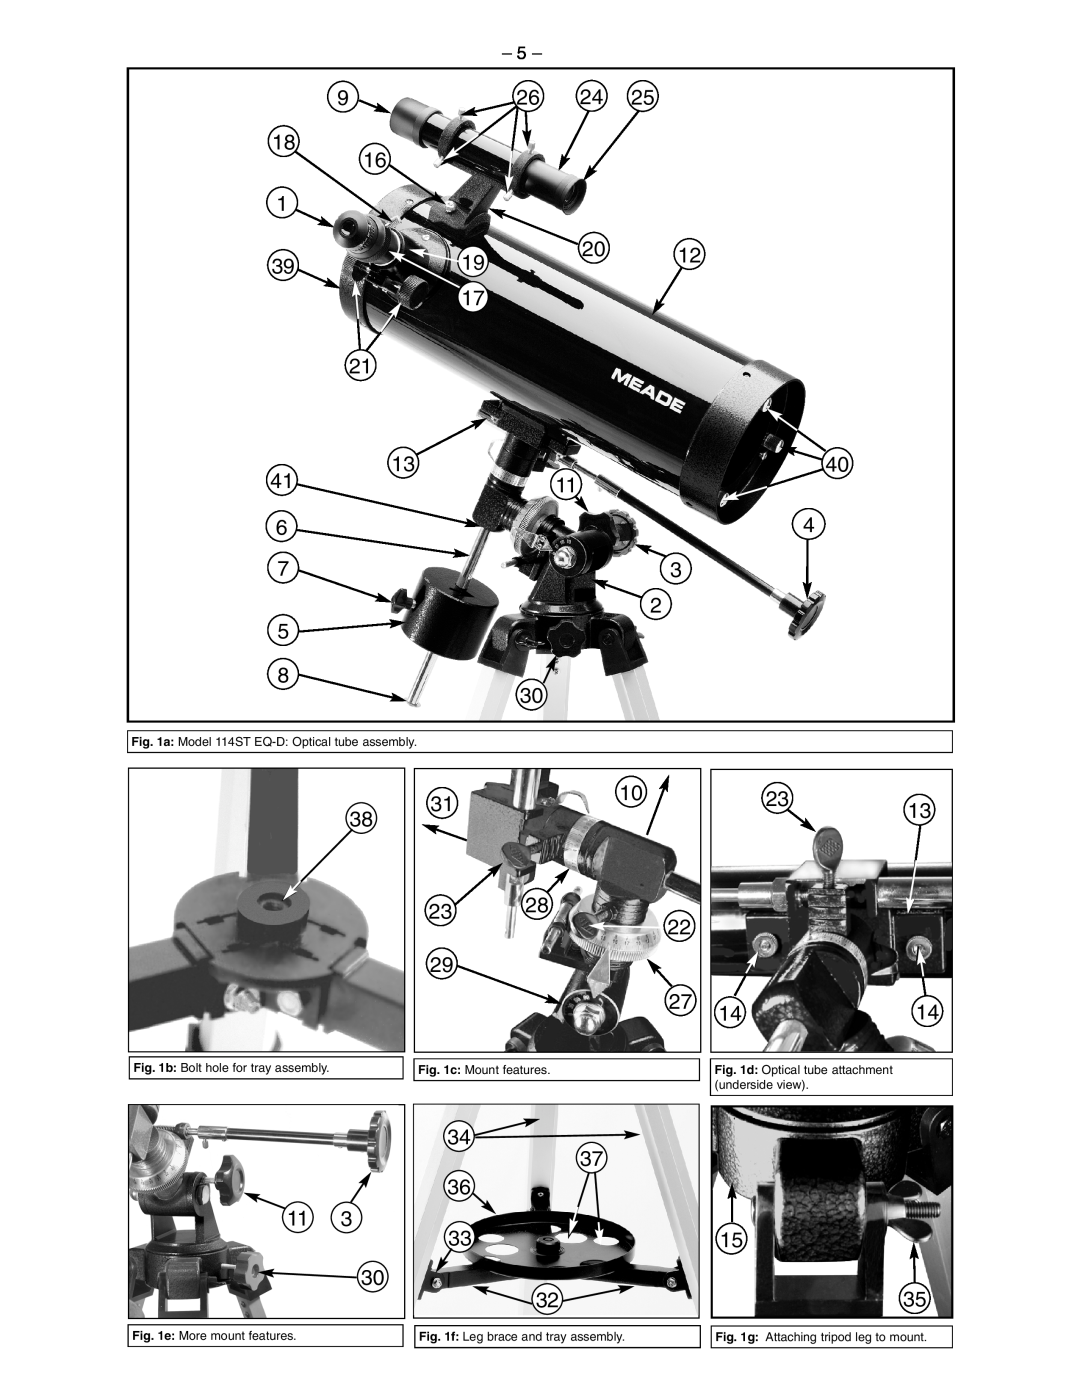 Meade 5, a: Model 114ST EQ-D:Optical tube assembly, b: Bolt hole for tray assembly, c: Mount features, underside view 